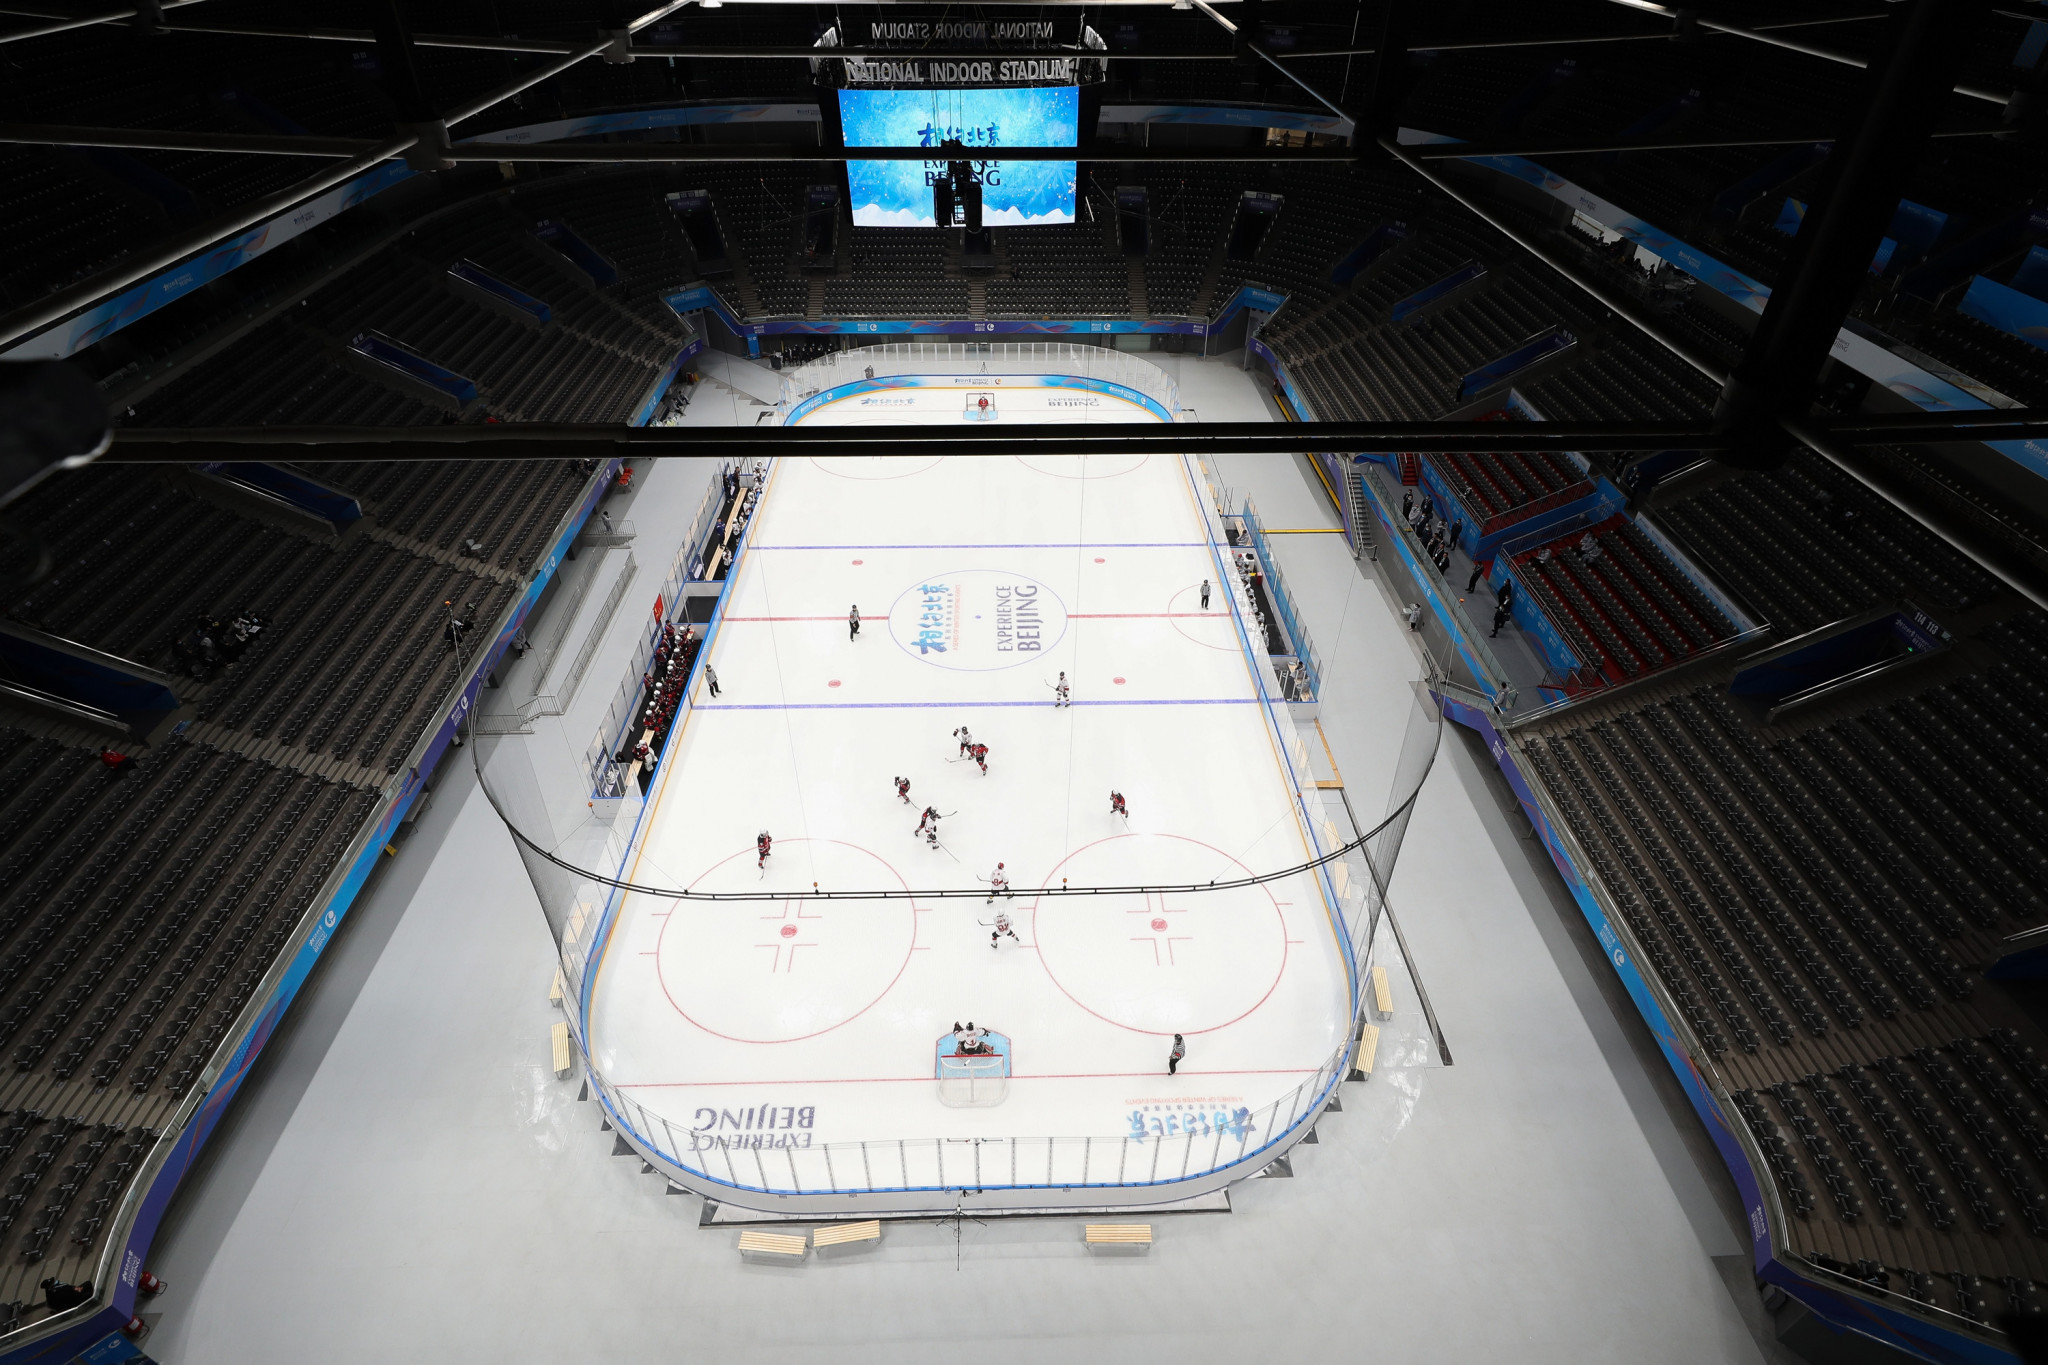 Beijing National Indoor Stadium is one of two venues for the Olympic ice hockey tournaments  ©Getty Images 